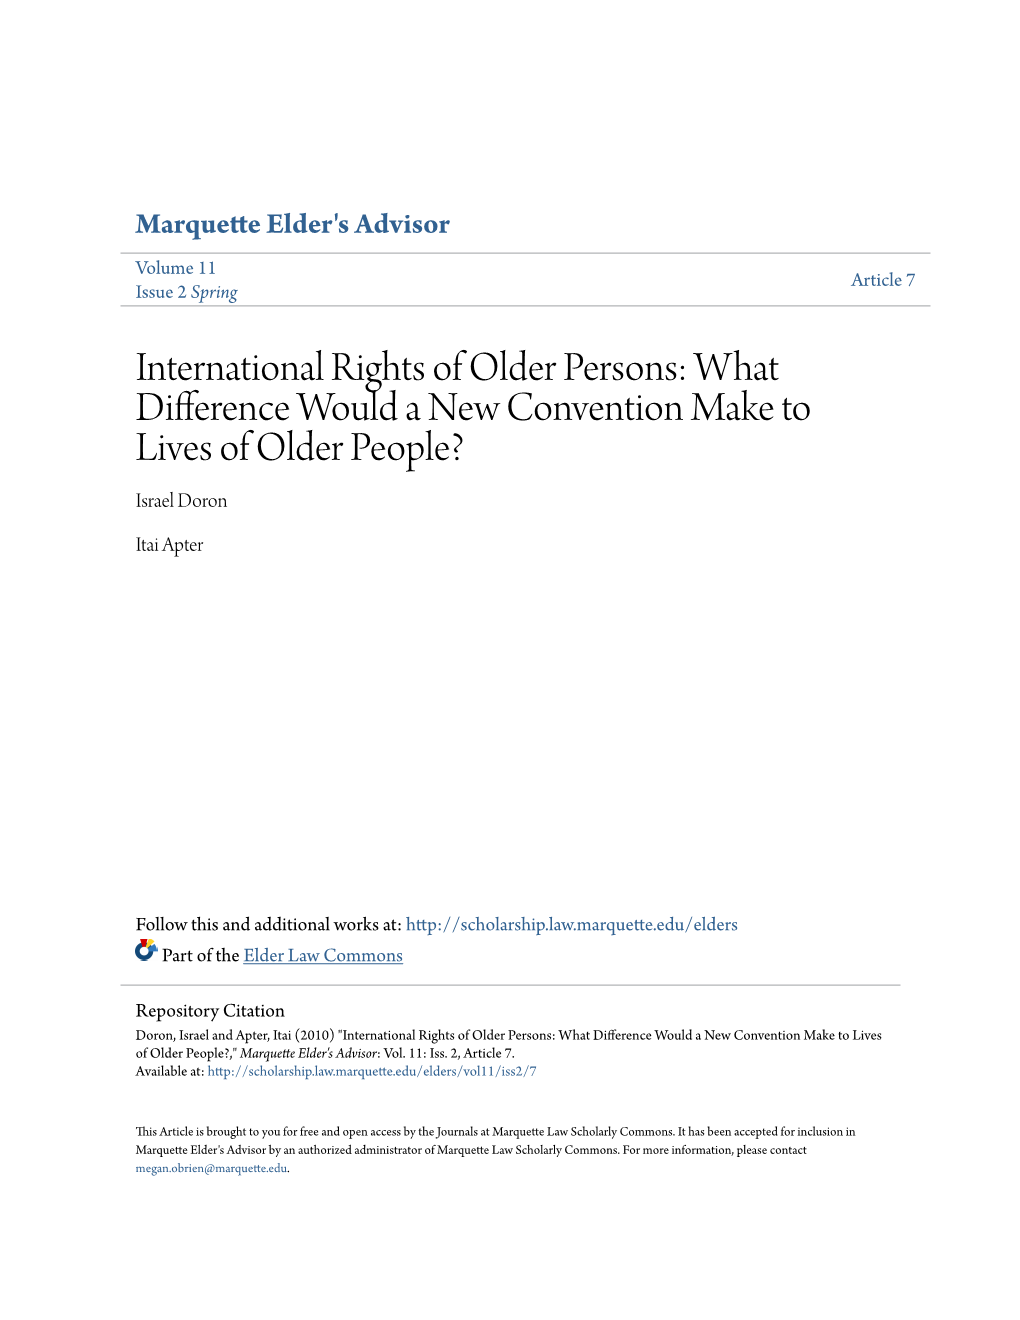 International Rights of Older Persons: What Difference Would a New Convention Make to Lives of Older People? Israel Doron